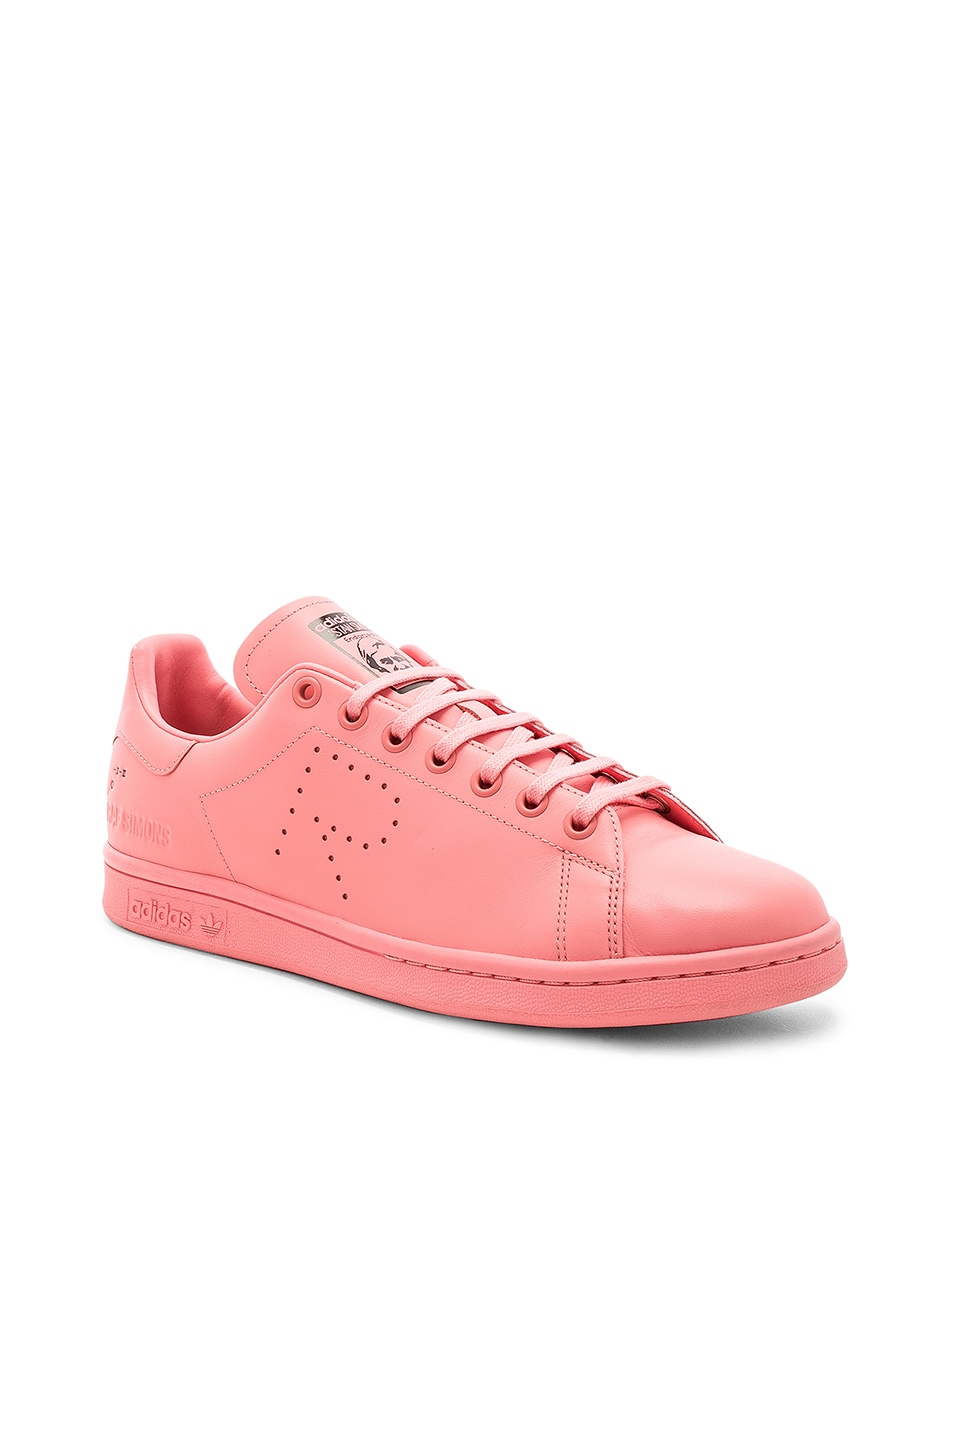 Image 1 of adidas by Raf Simons Stan Smith in Tactile Rose F17 & Bliss Pink S13 & White